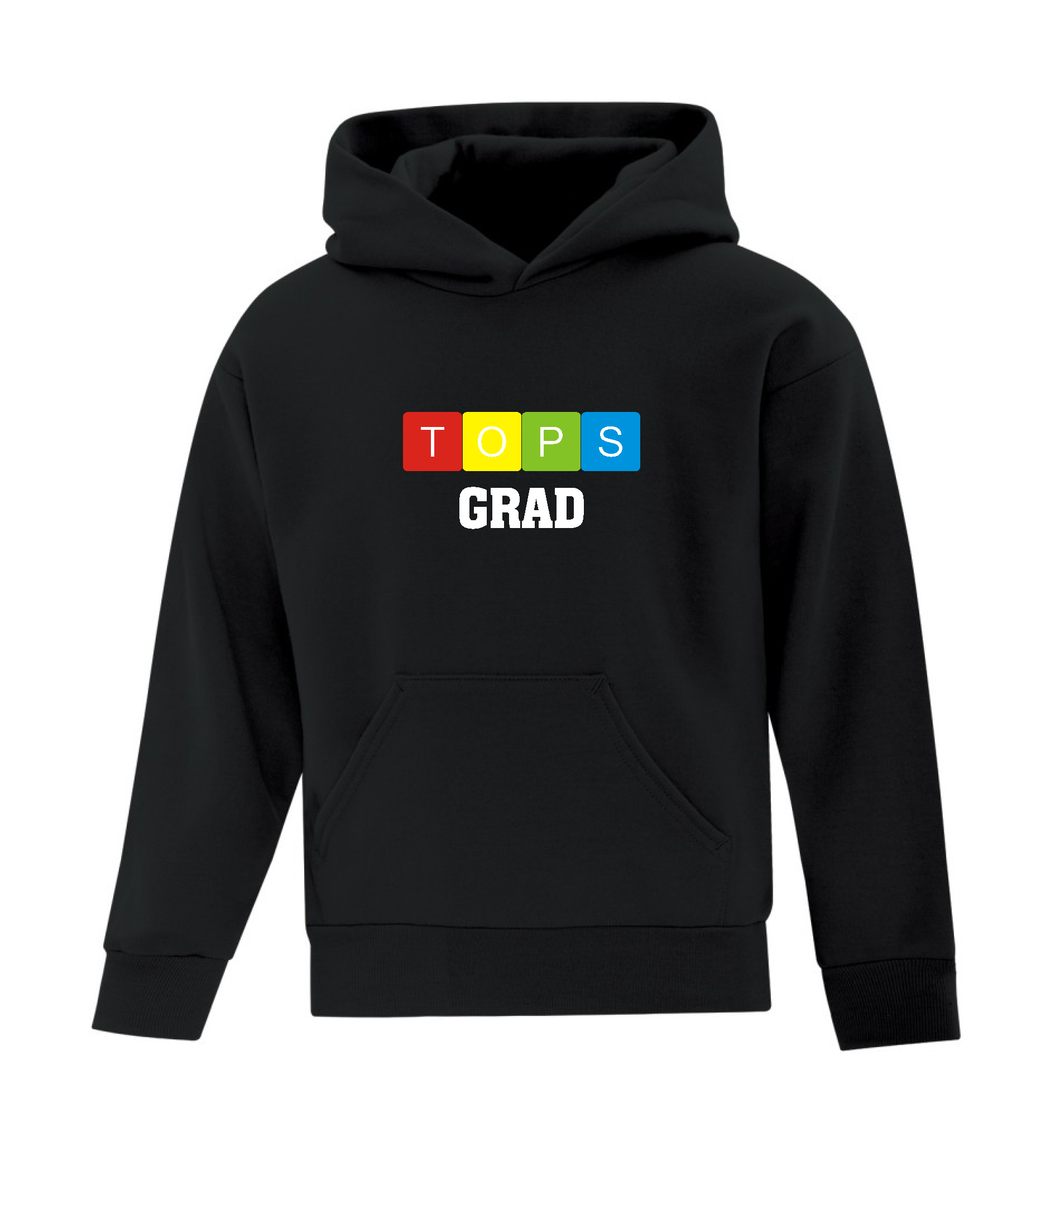 Youth Hoodie - GRAD with TOPS Blocks Logo